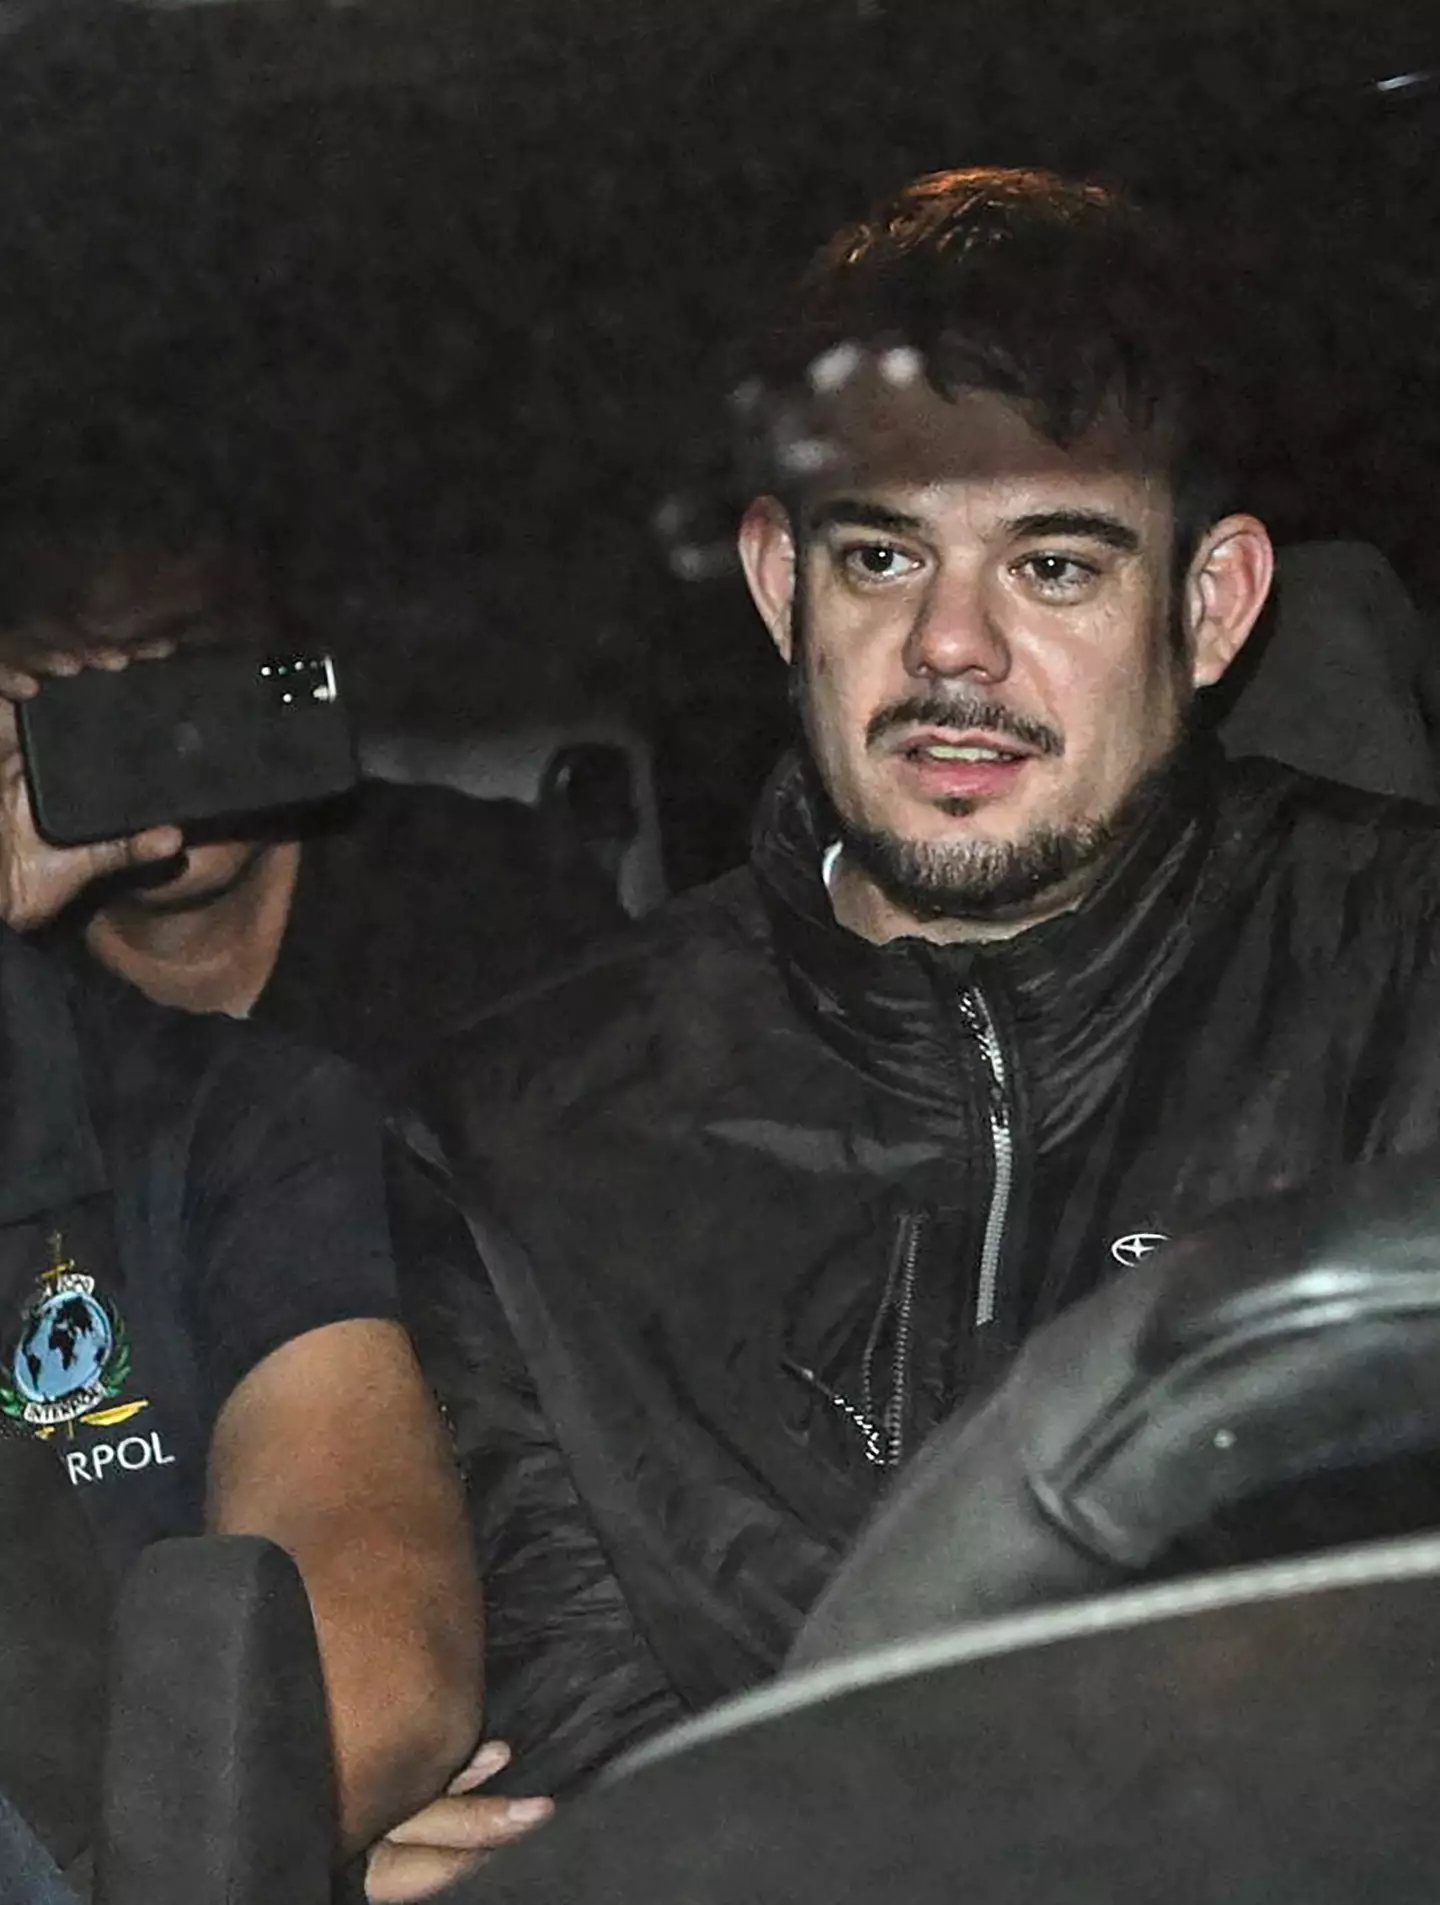 Joran van der Sloot apologized to the Holloway family for the years of torment he's caused them.